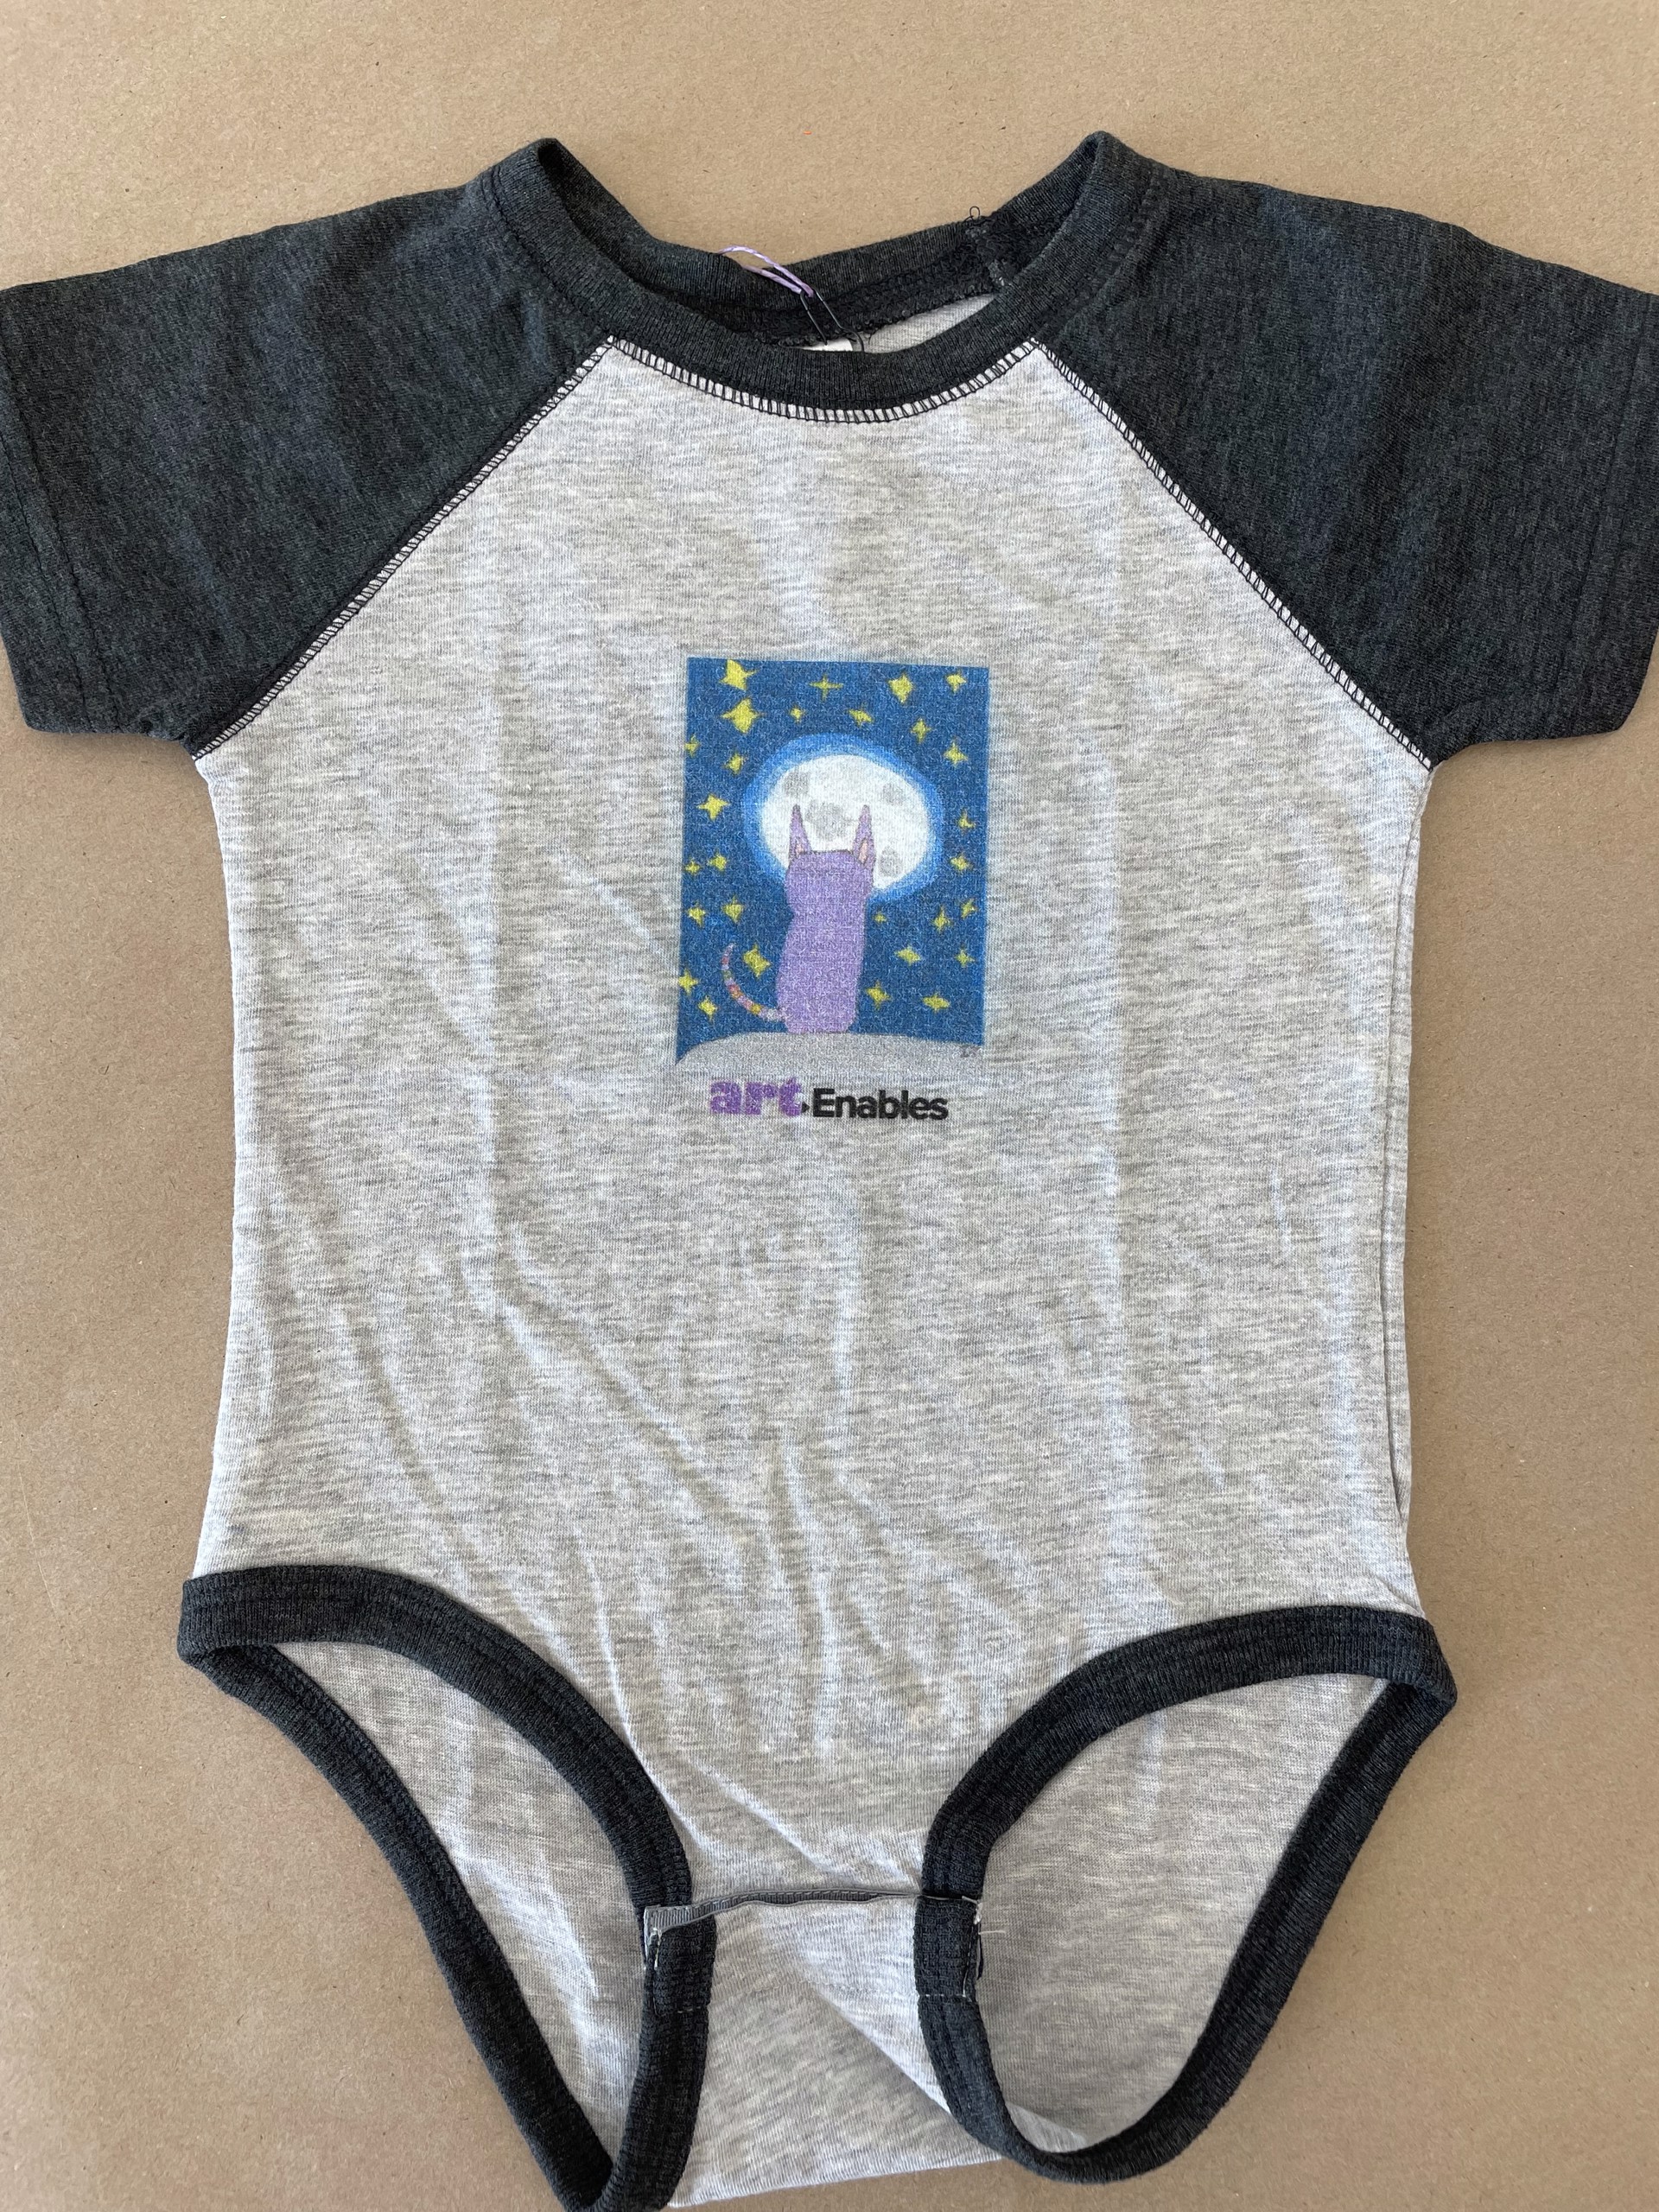 Baby Baseball Onesie (artwork by Imani Turner) 6 mo - charcoal heather gray by Art Enables Merchandise